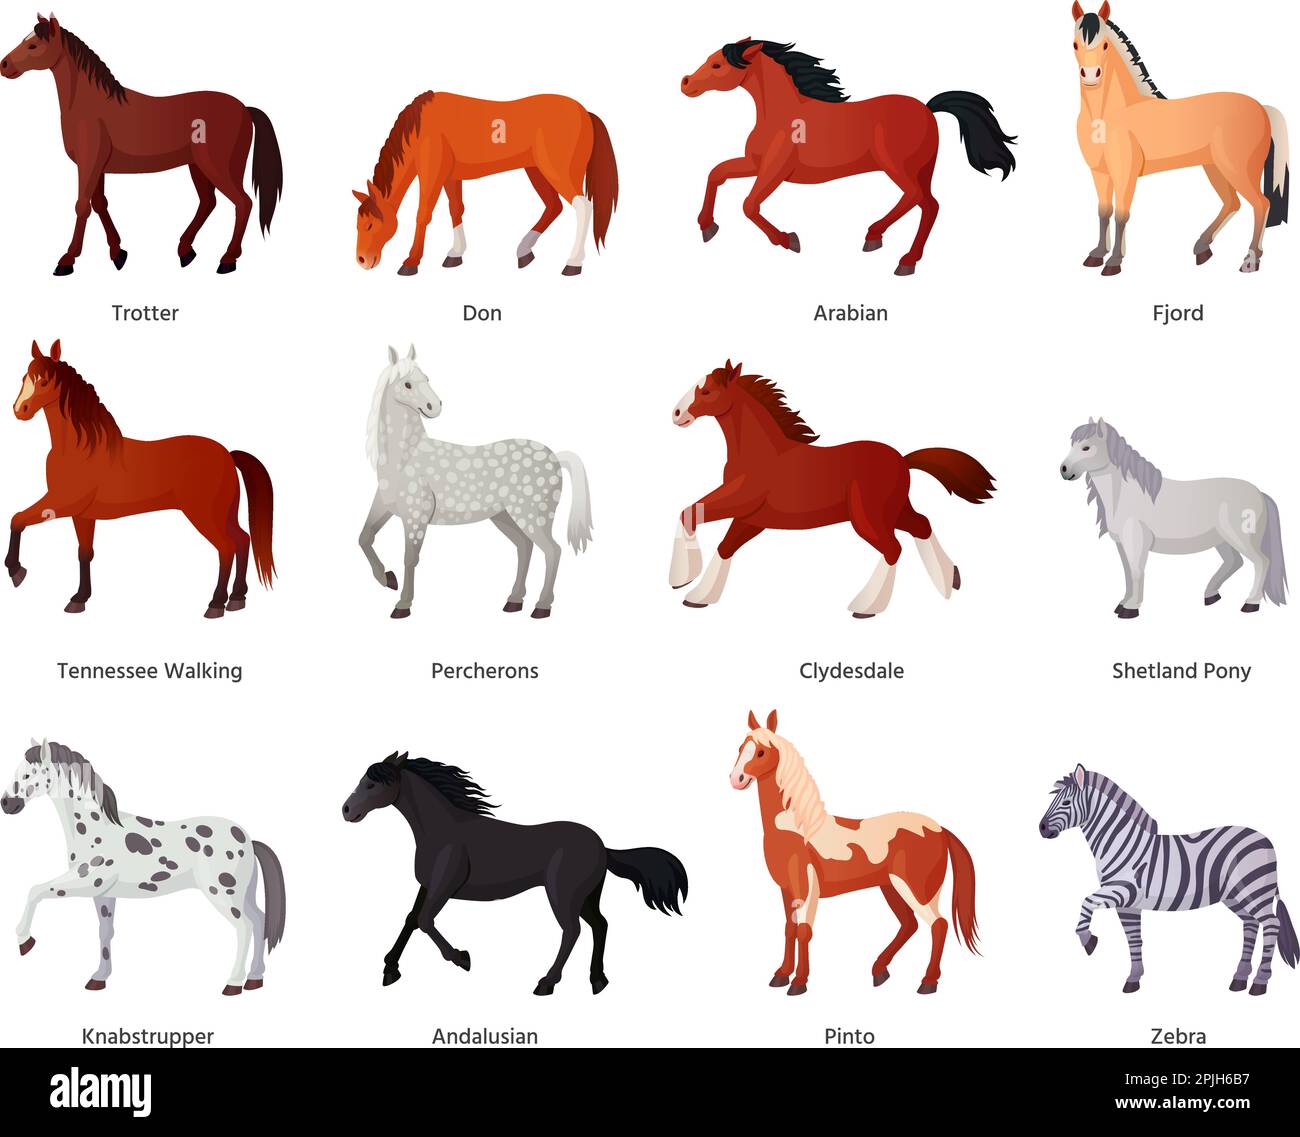 Horses breeds. Horse farm breeding for horseback riding, different breed thoroughbred clydesdale miniature pony beautiful shetland mare trotter zebra ingenious vector illustration of farm horse animal Stock Vector